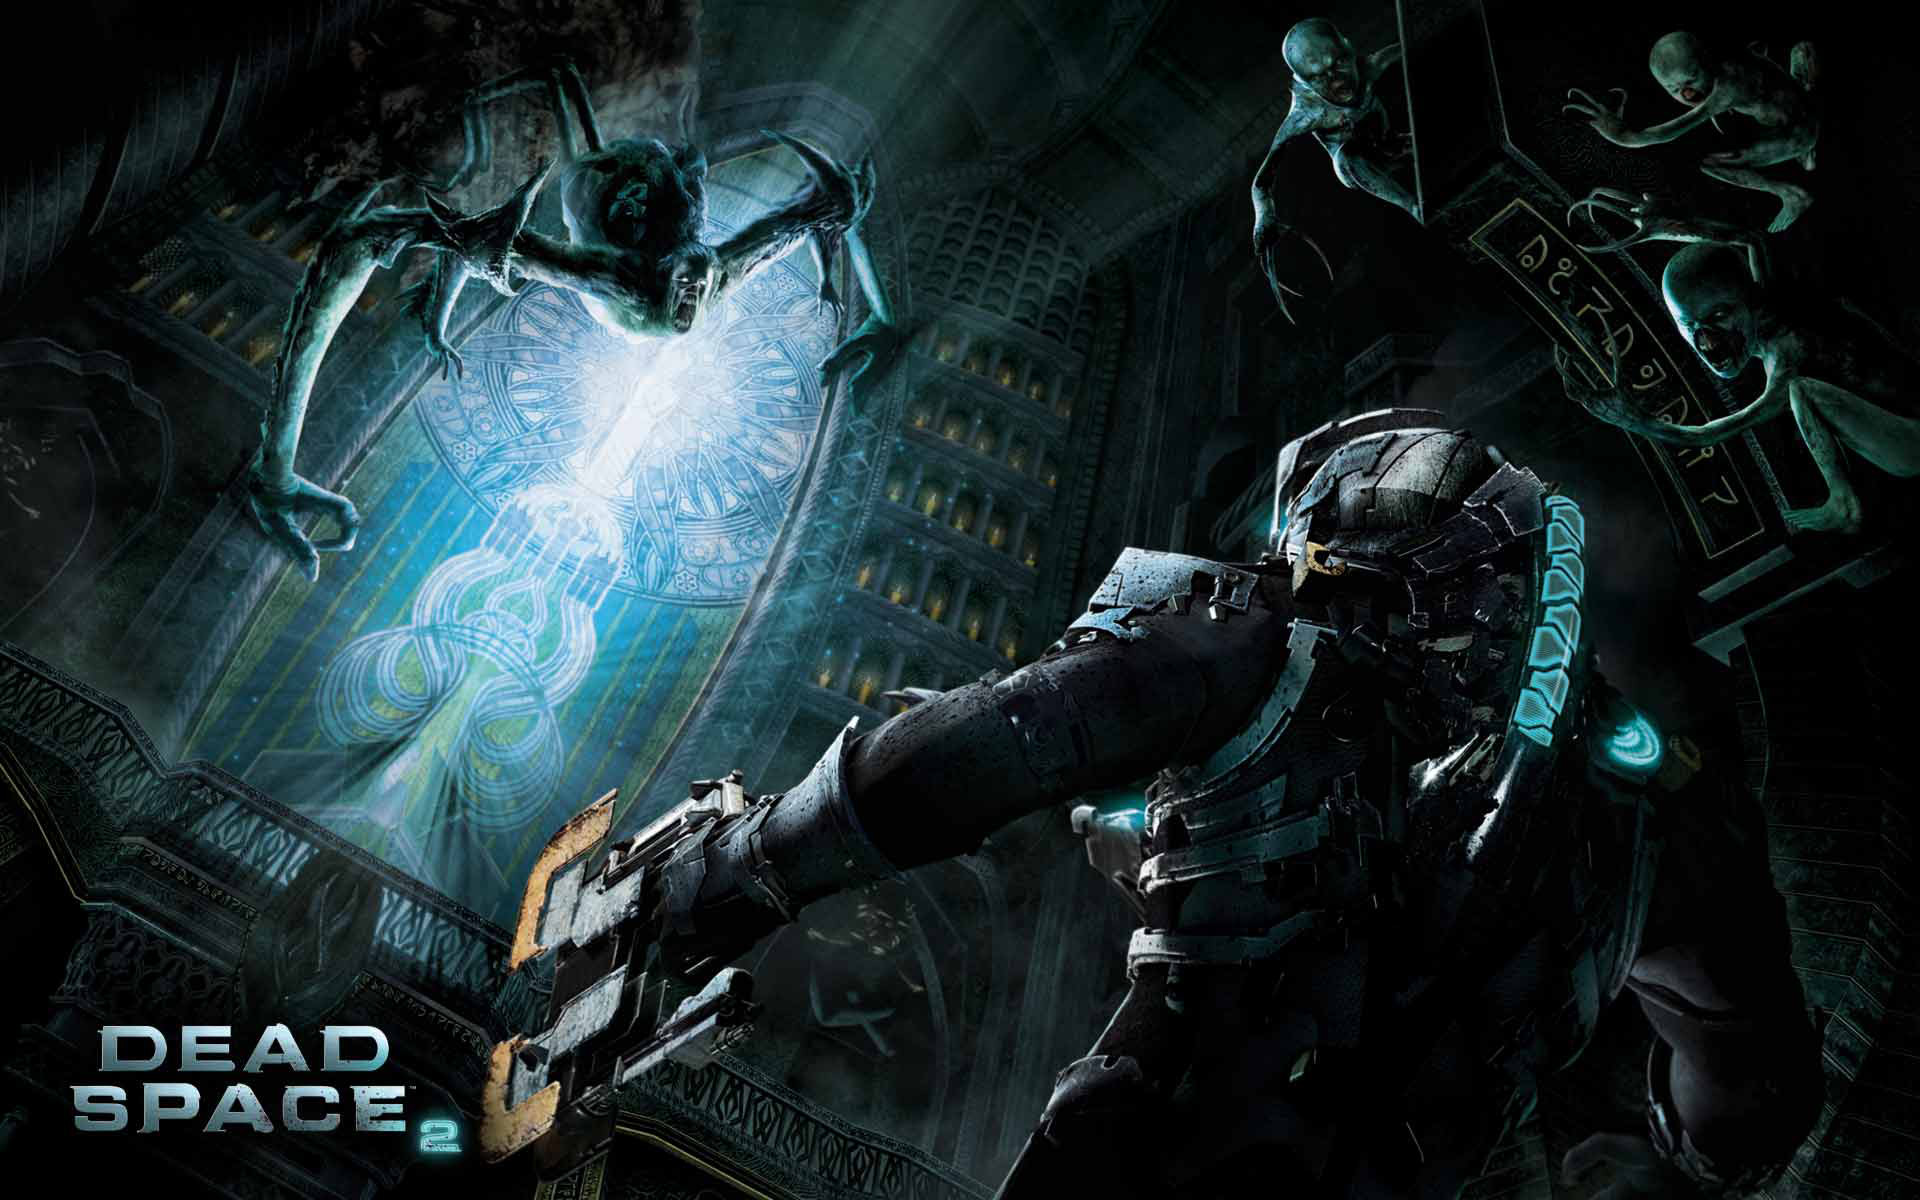 This Dead Space Theme for Windows 7 theme pack contains 16 HD Dead Space  Wallpapers